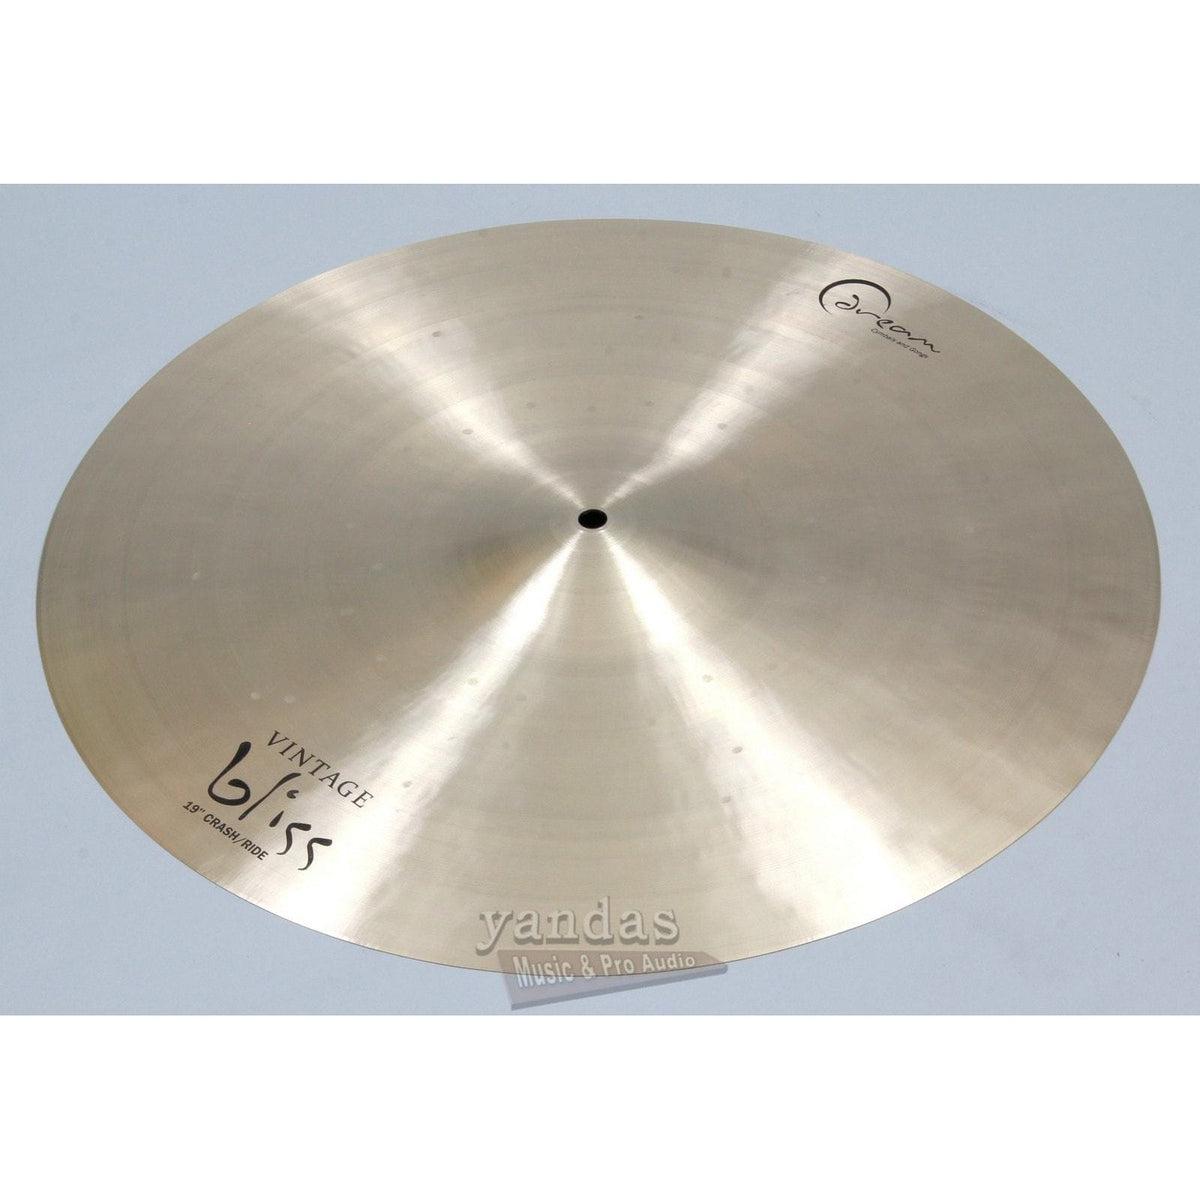 Dream Cymbals Vintage Bliss Crash/Ride Cymbal 19 Inch